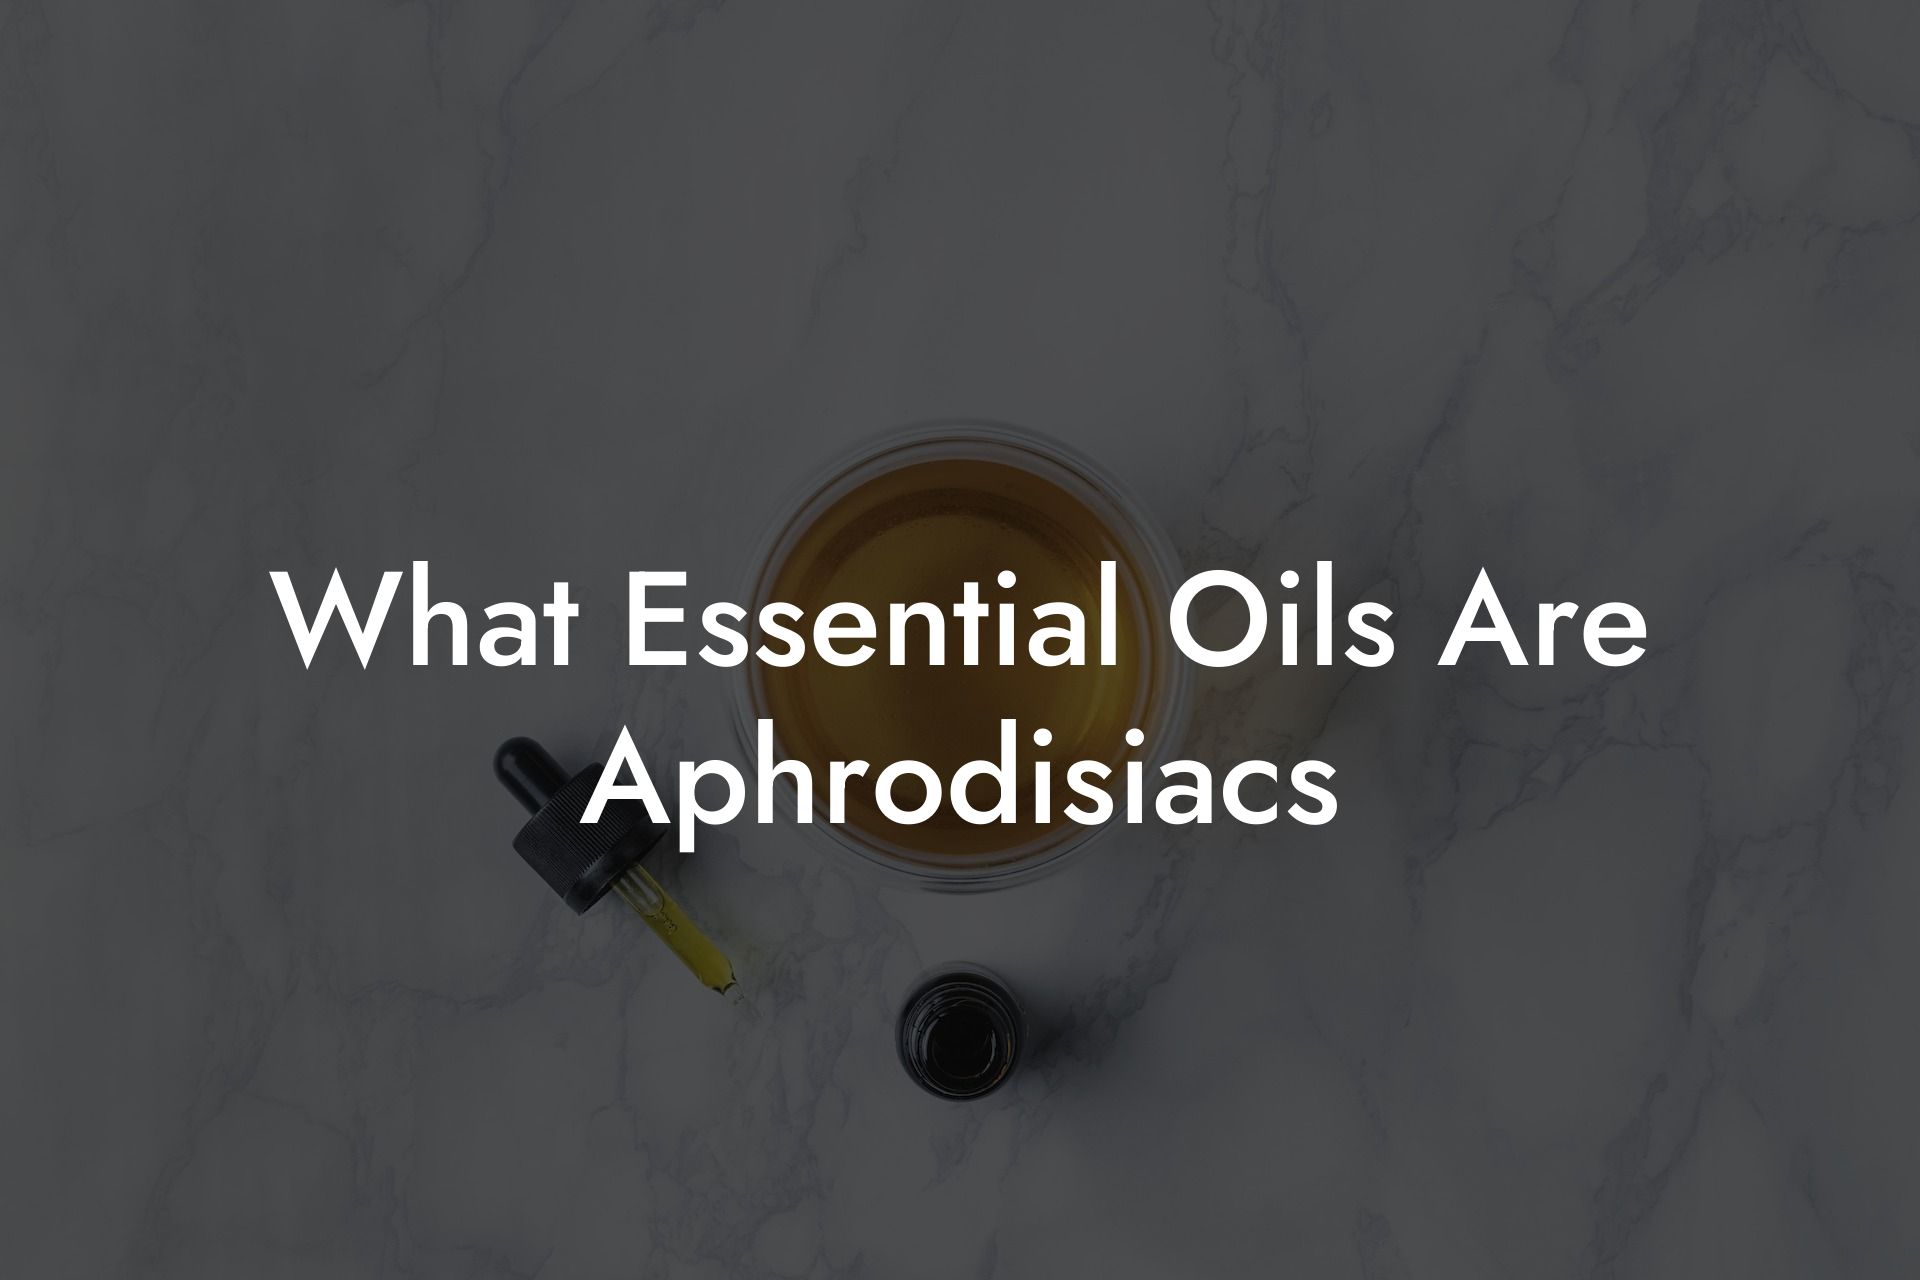 What Essential Oils Are Aphrodisiacs